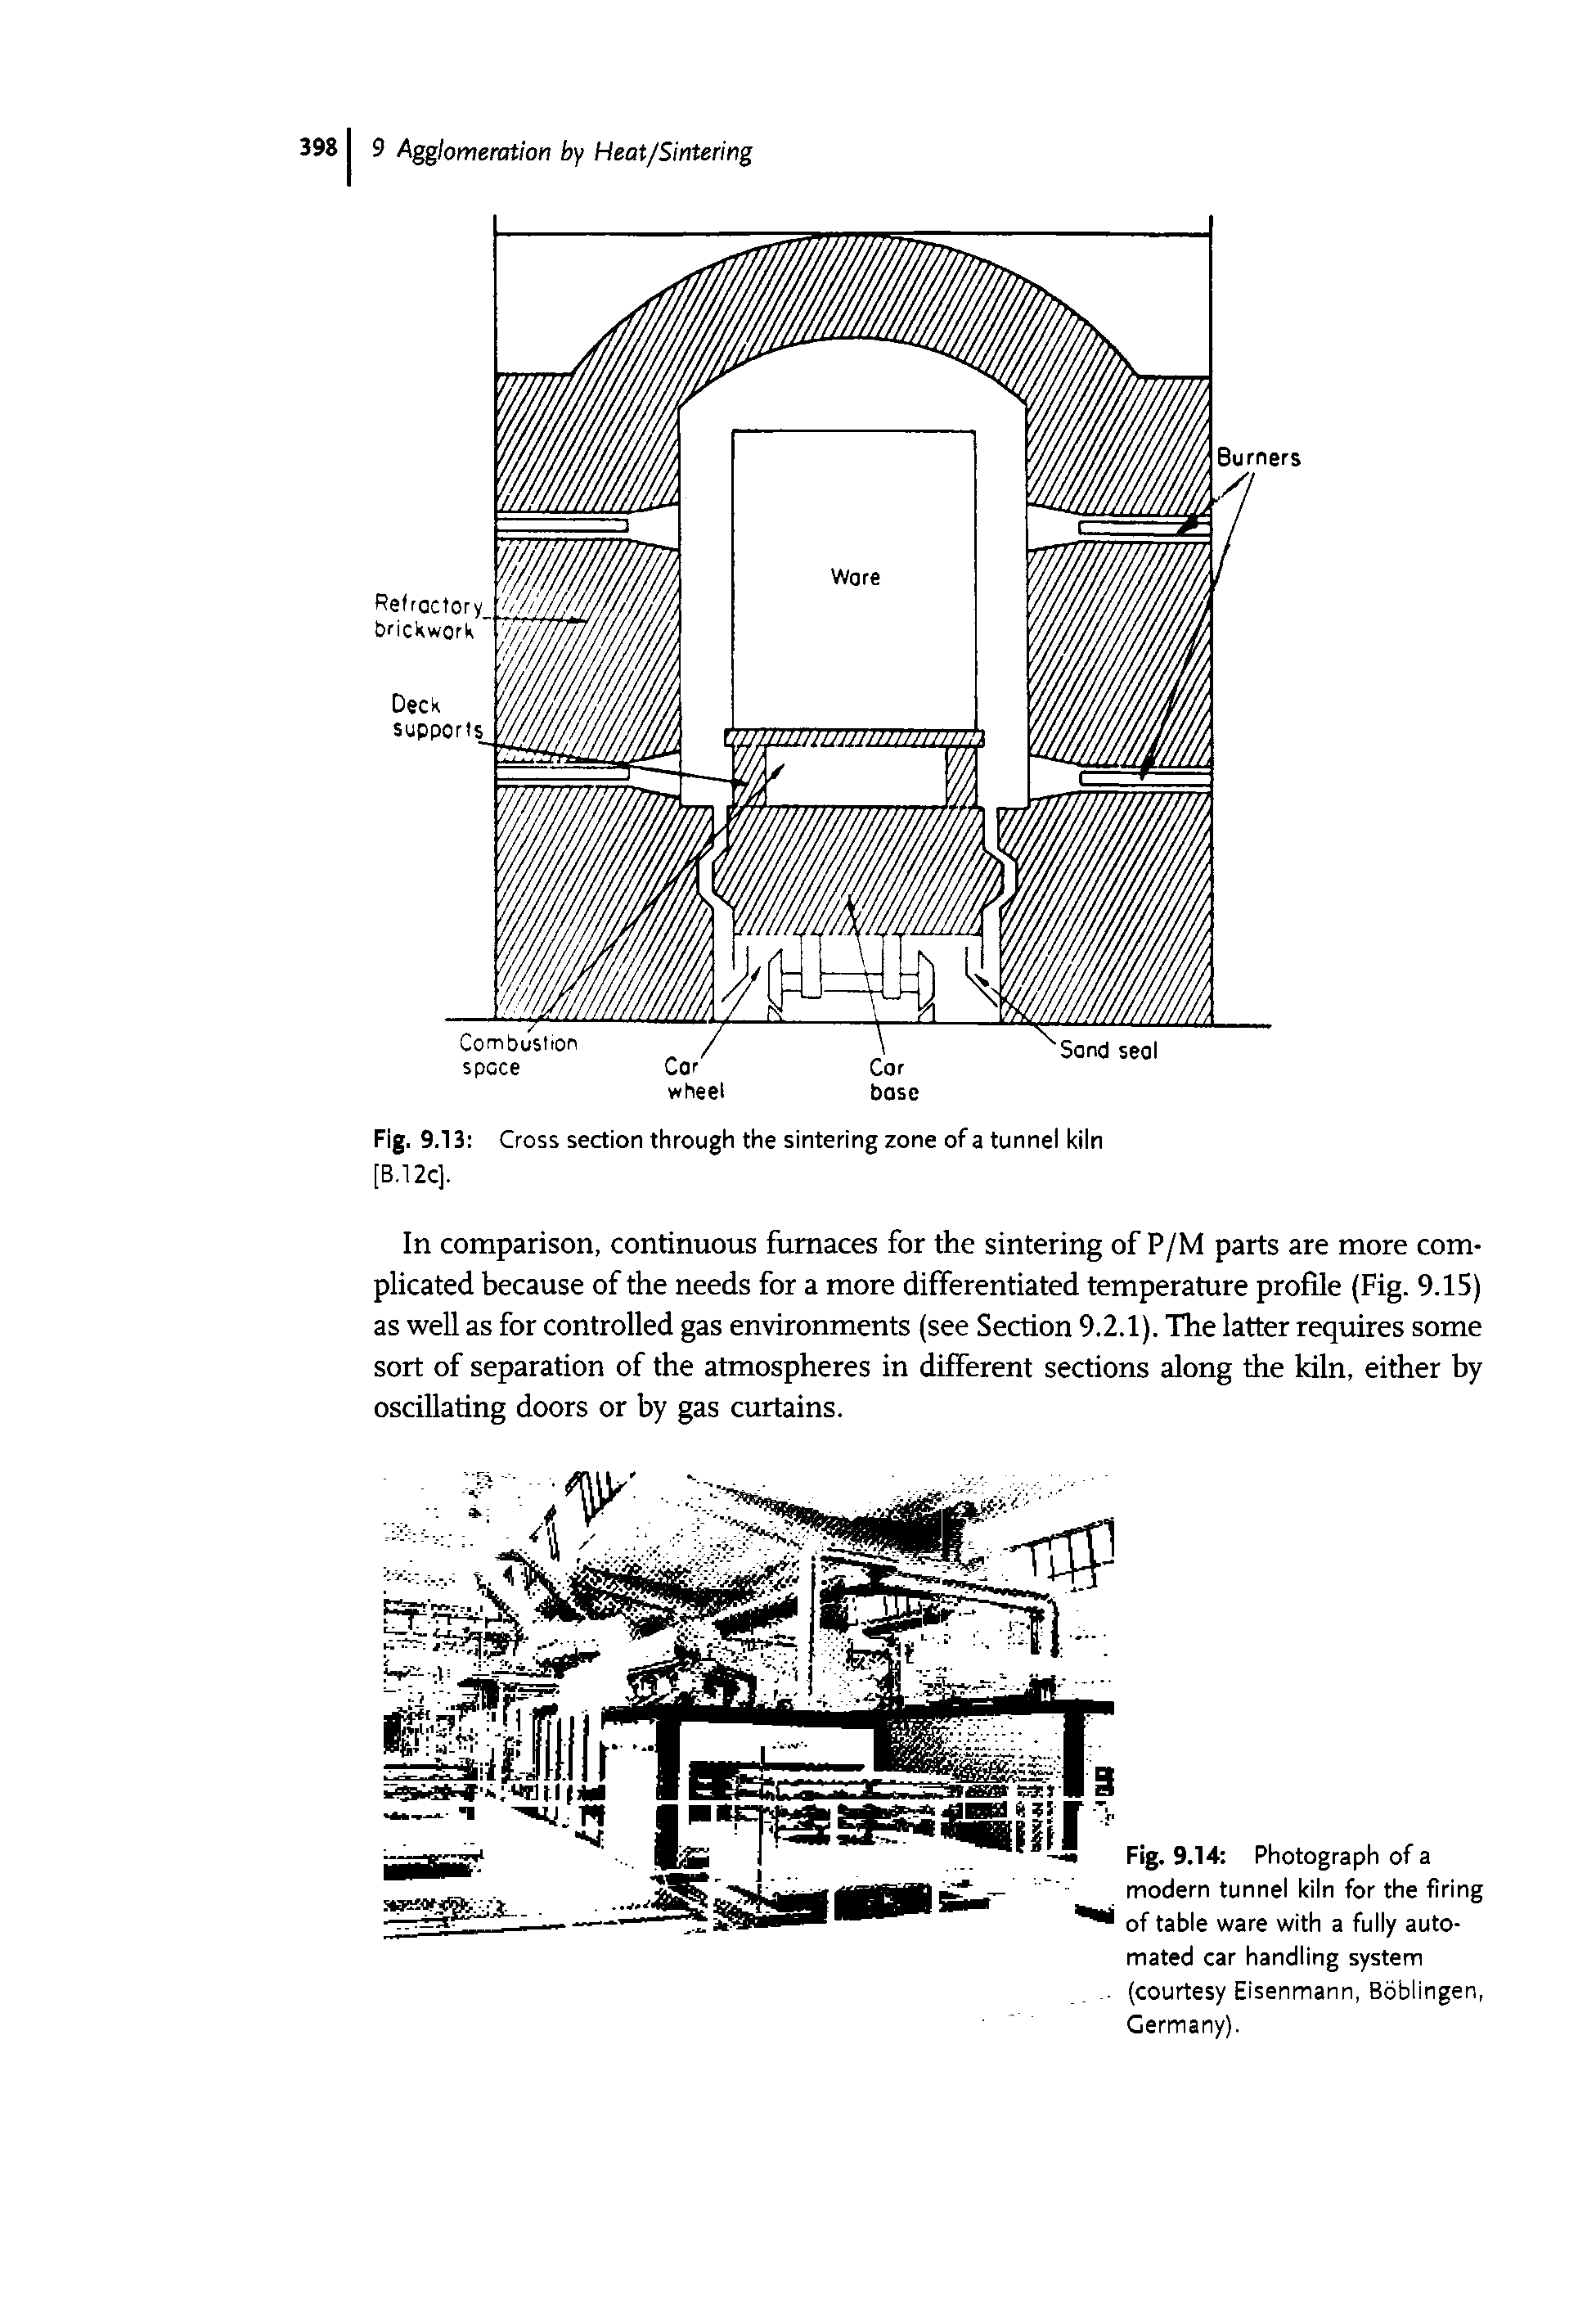 Fig. 9.13 Cross section through the sintering zone of a tunnei kiin [B.12C].